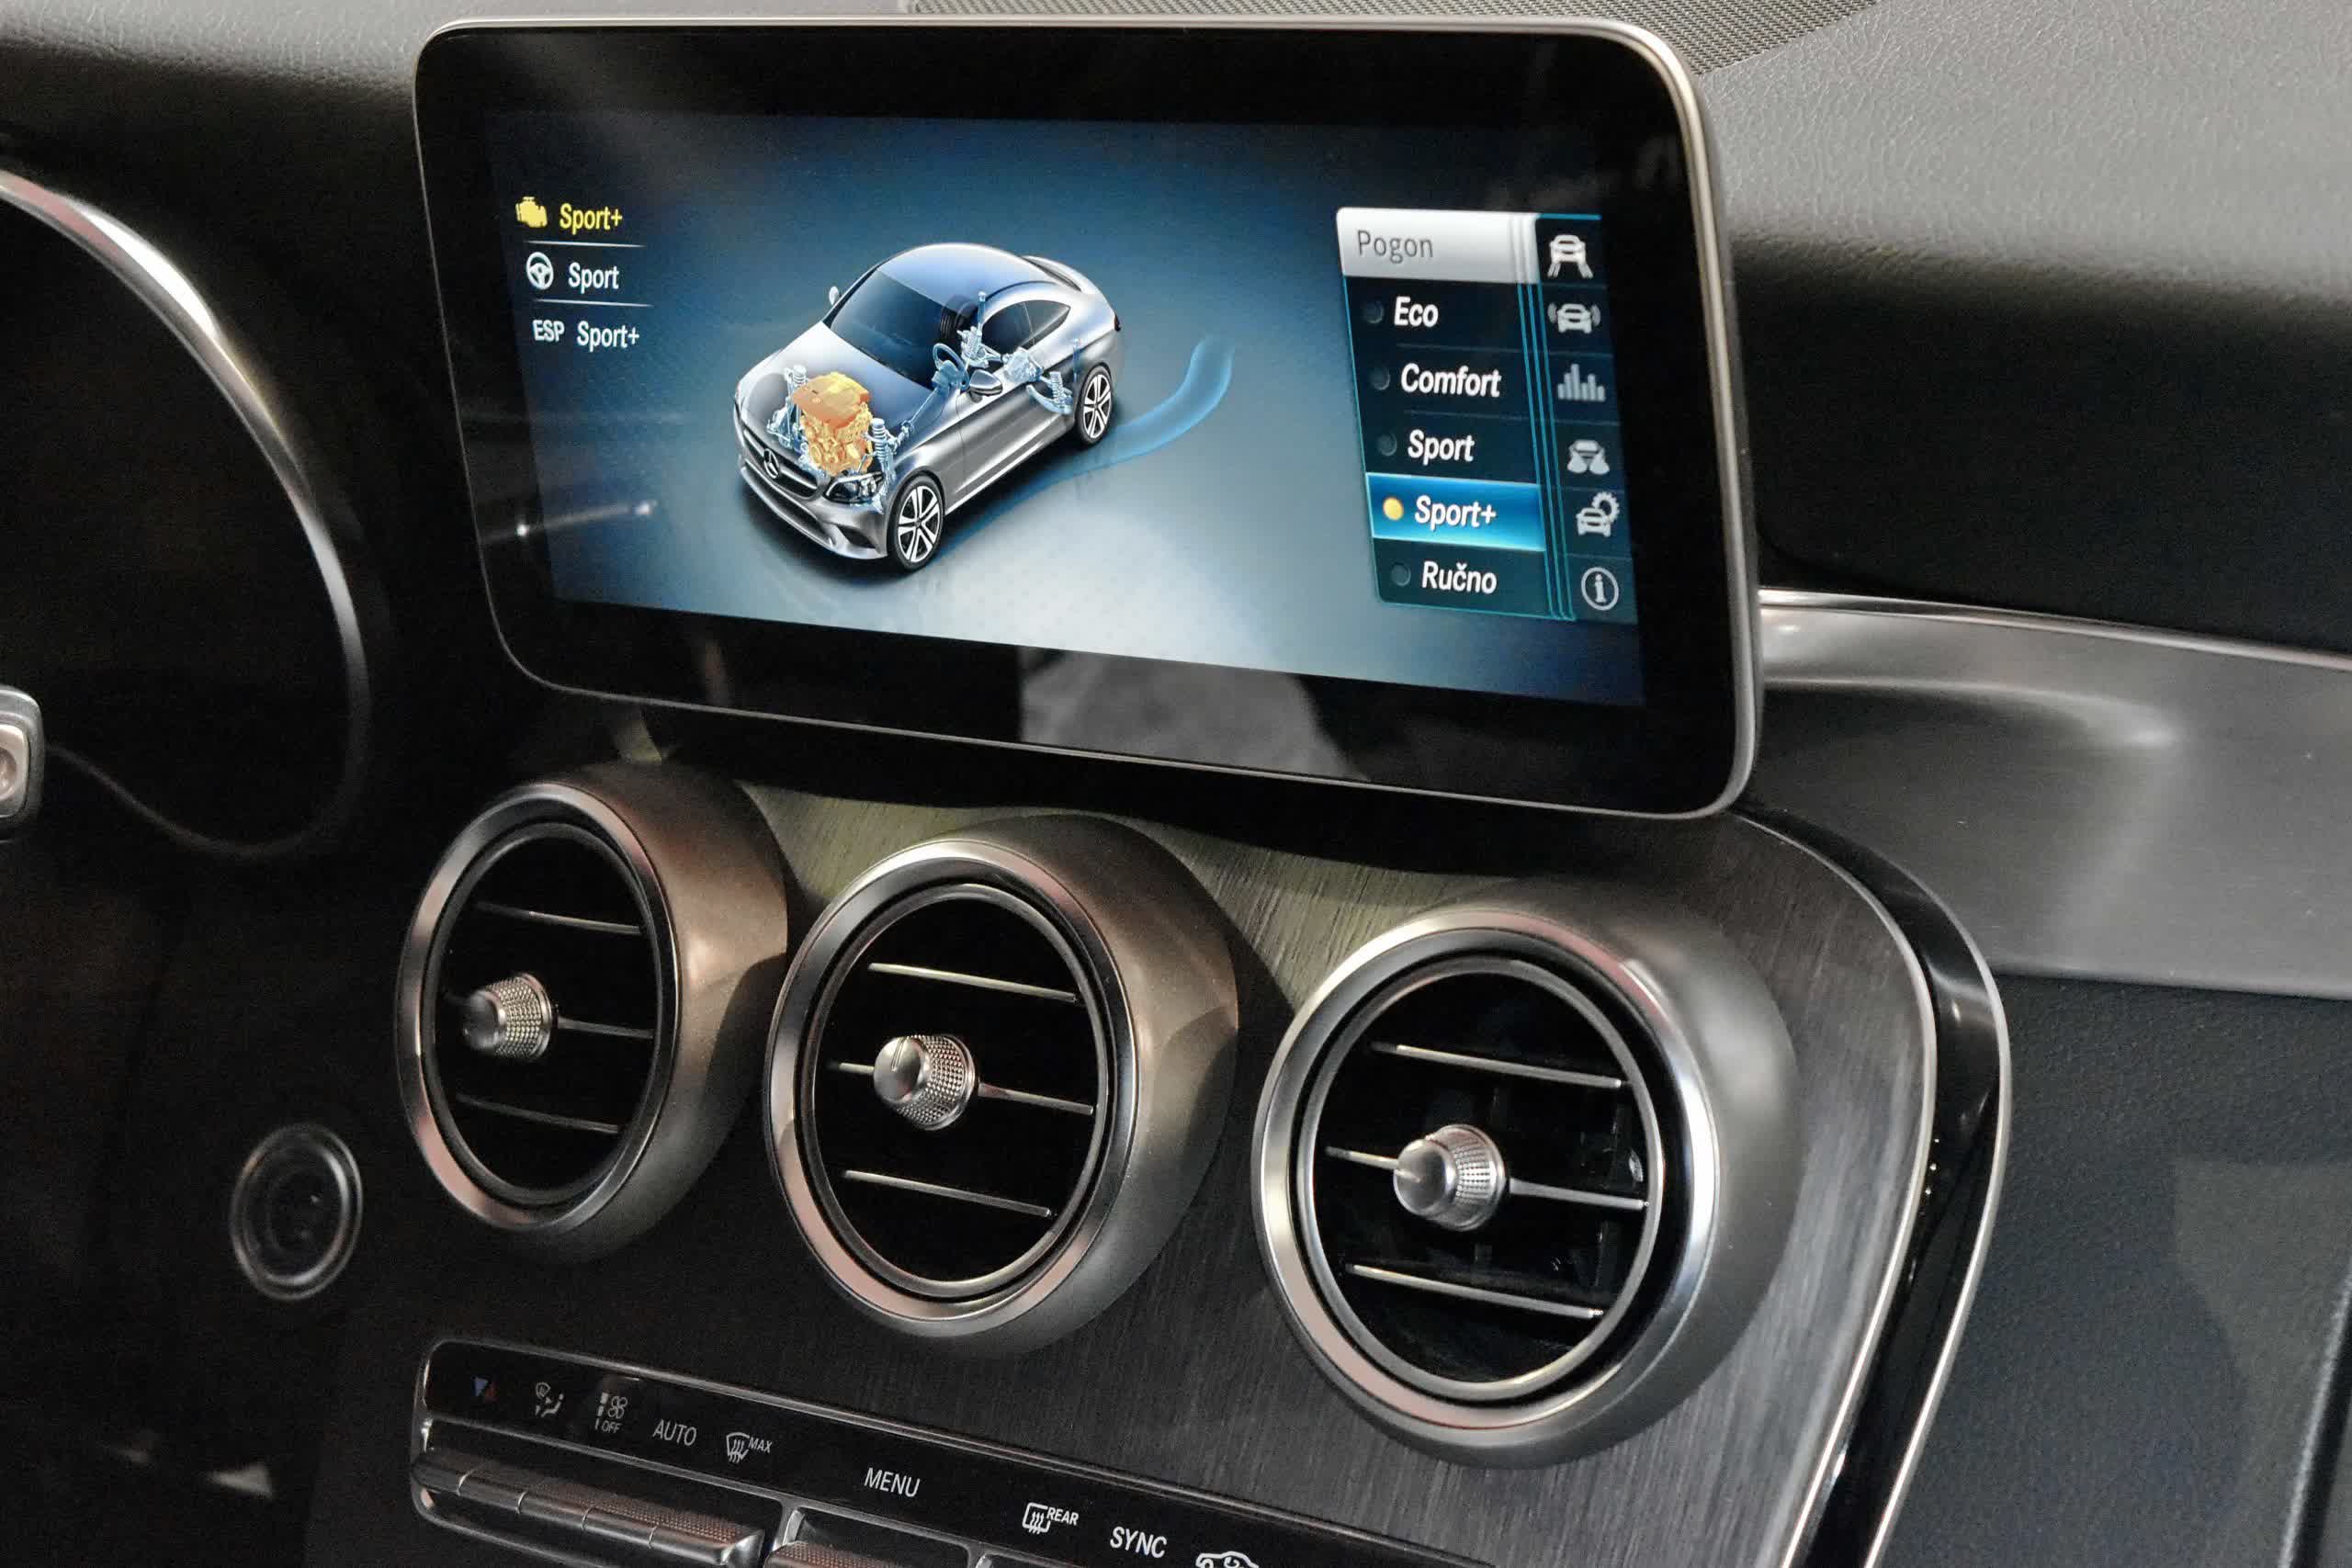 Audi infotainment system informs owners of unpaid options